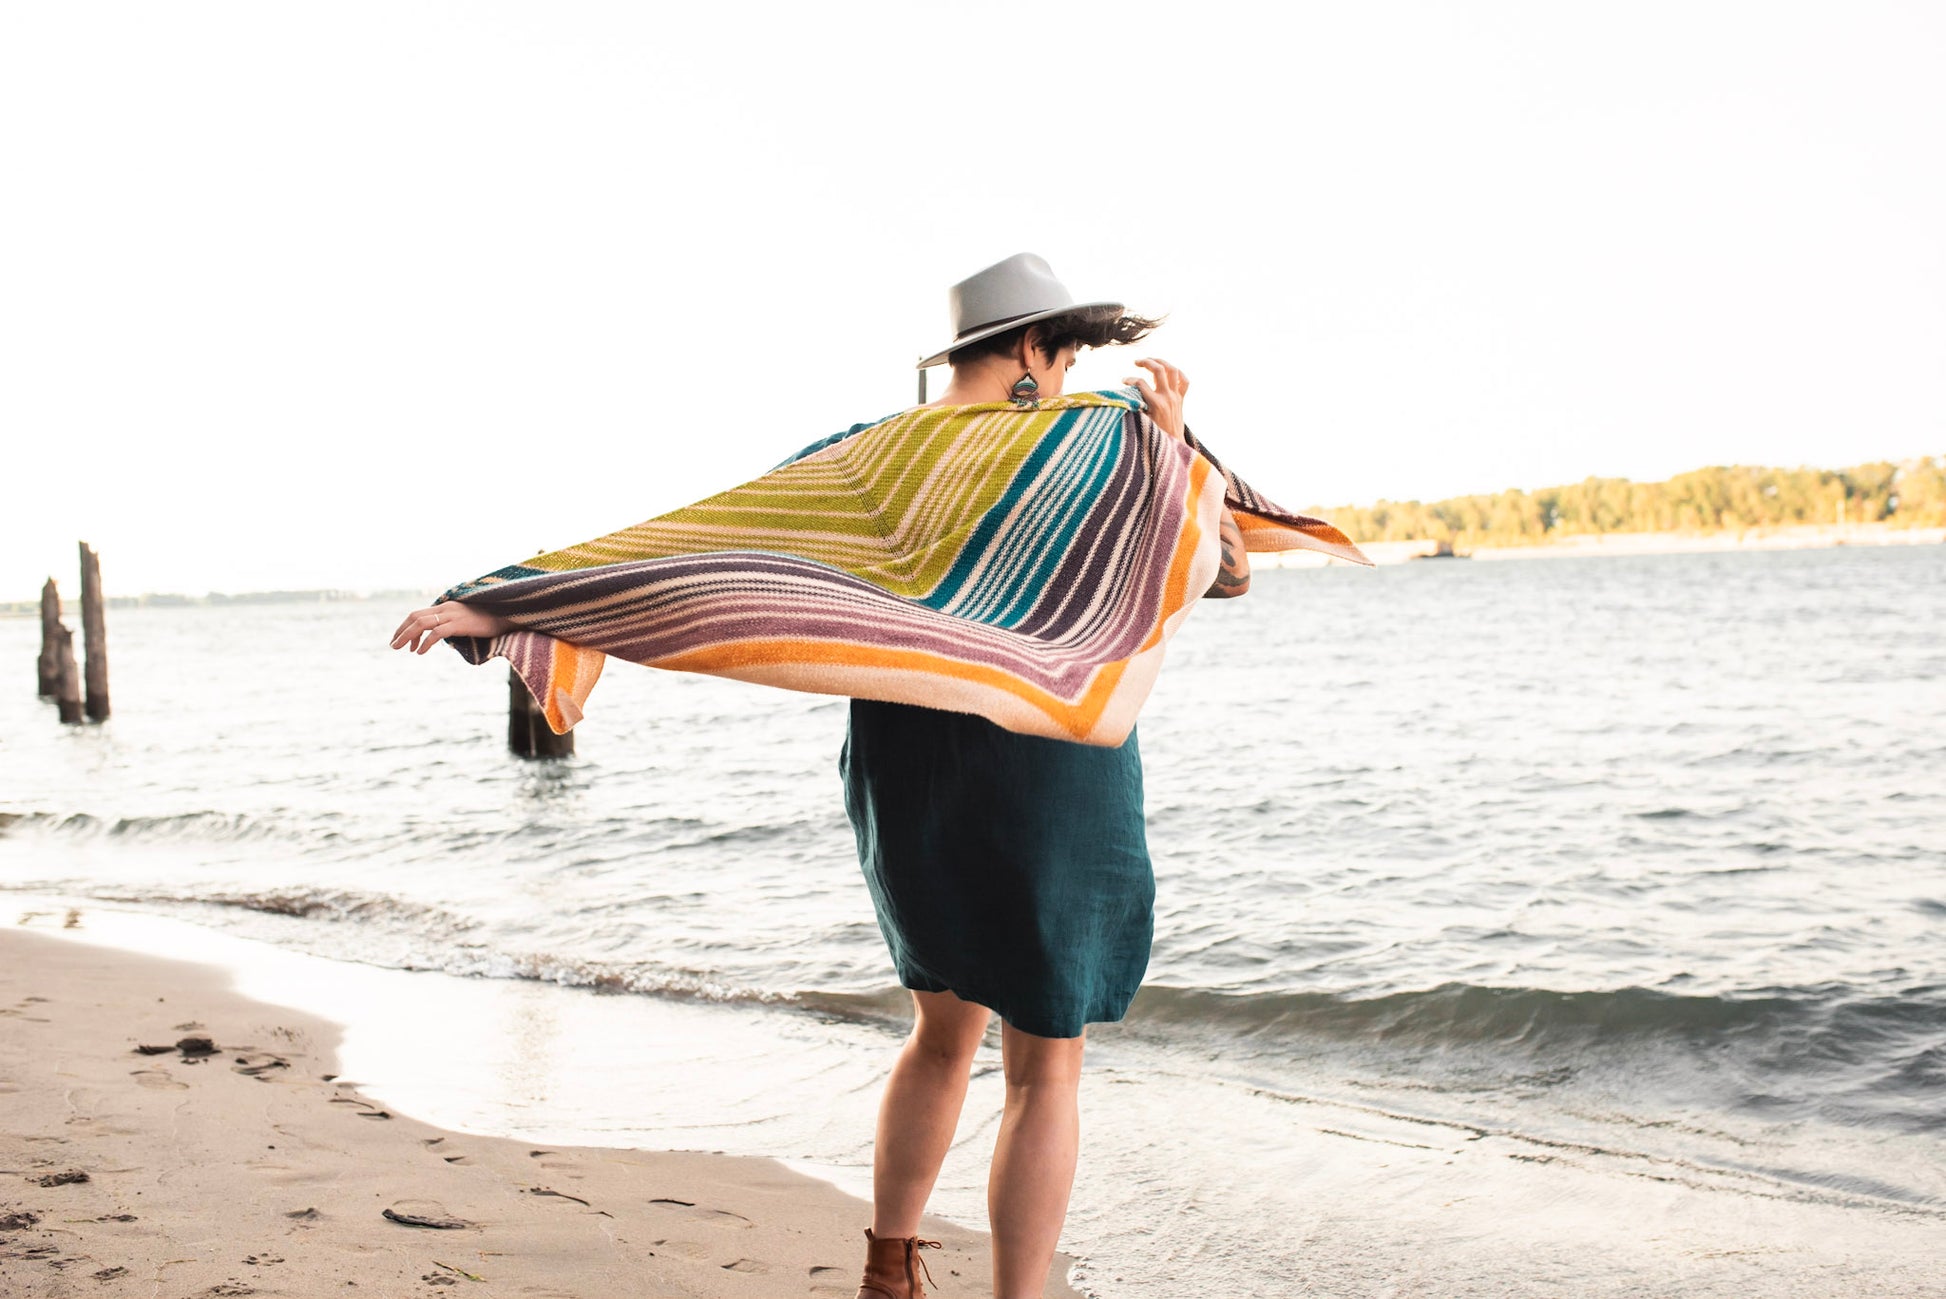 Seen from behind, Jen wears a striped shawl with a blue dress and a white hat. The shawl is knit in a triangle shape, and flows in the wind. A beach and waterfront can be seen in the background.